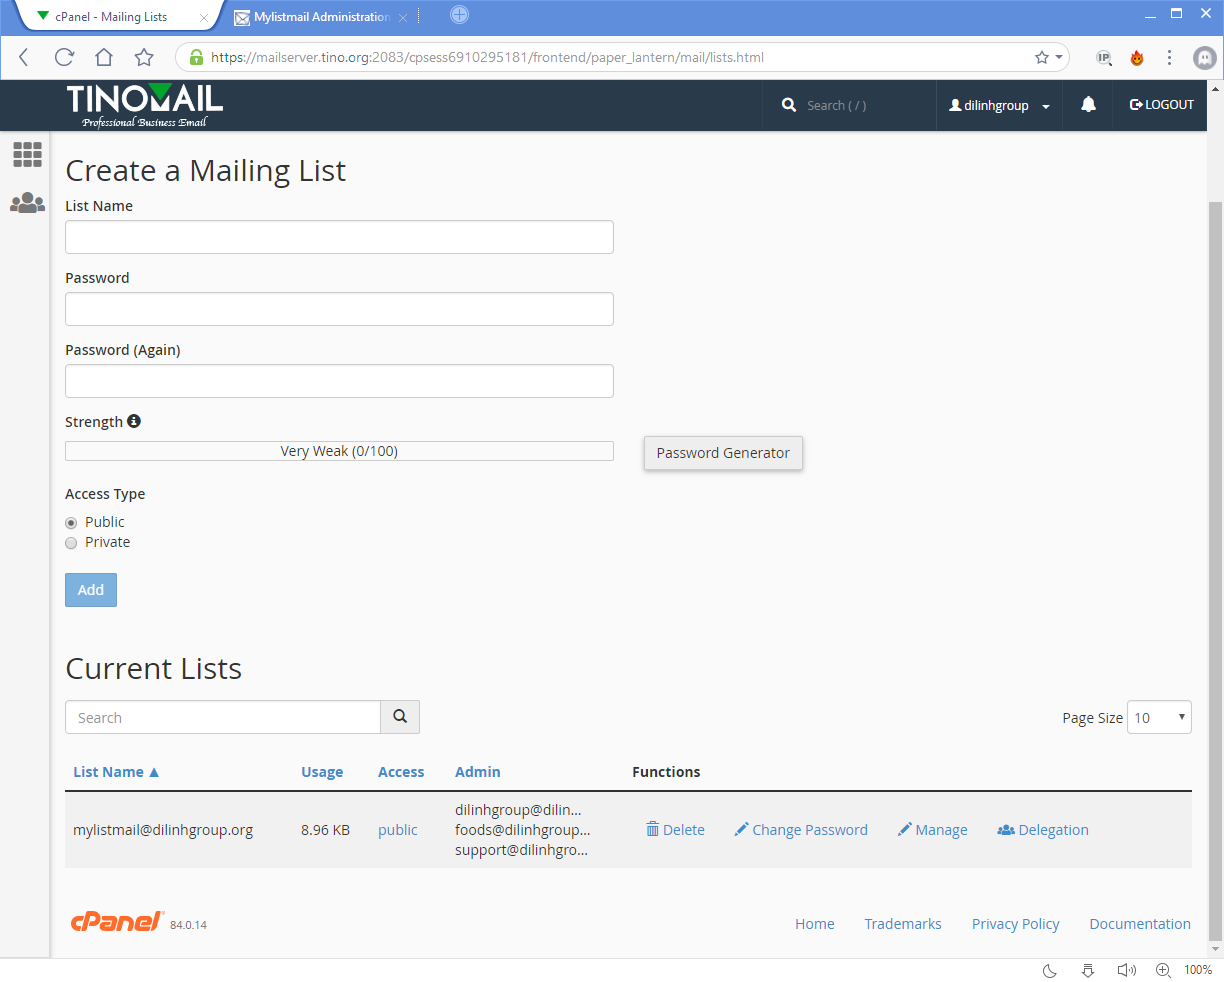 [cPanel] - Mailing Lists 4